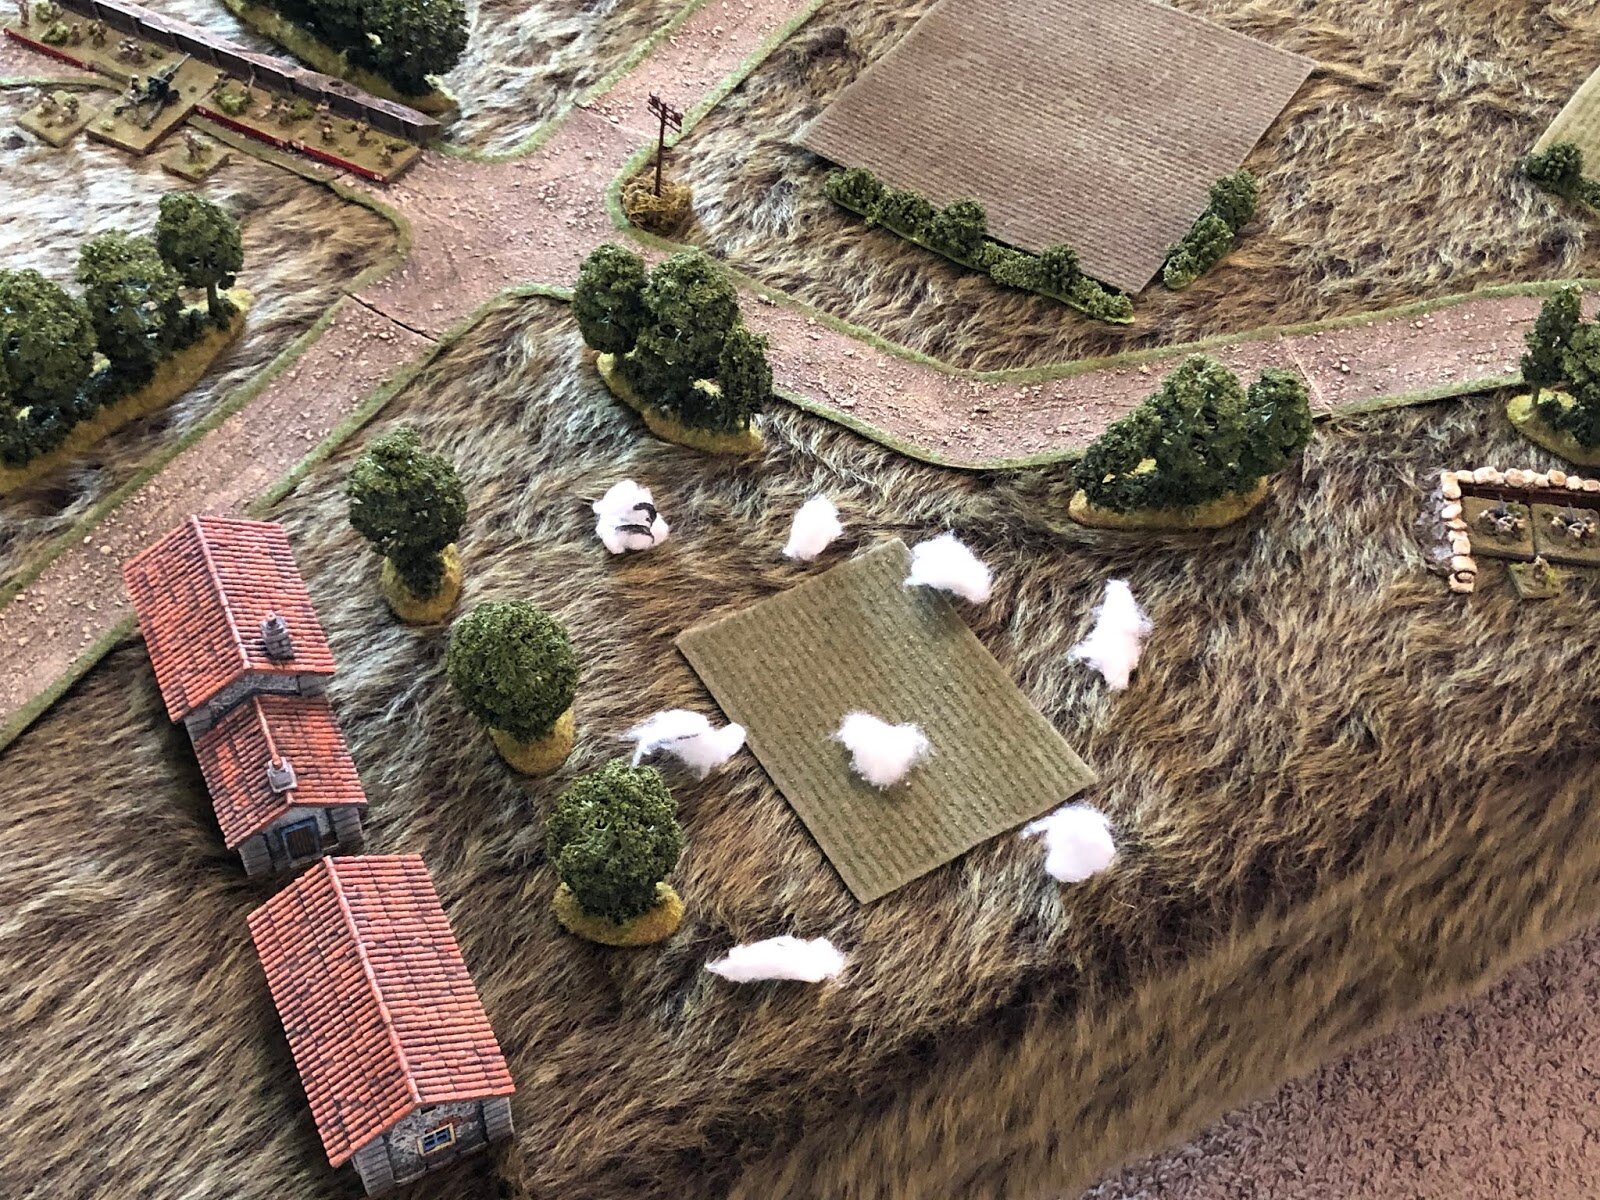 But they're a bit short, landing between the Collective Farm and the MG Platoon's position (far right, with Strongpoint Mila at top left).